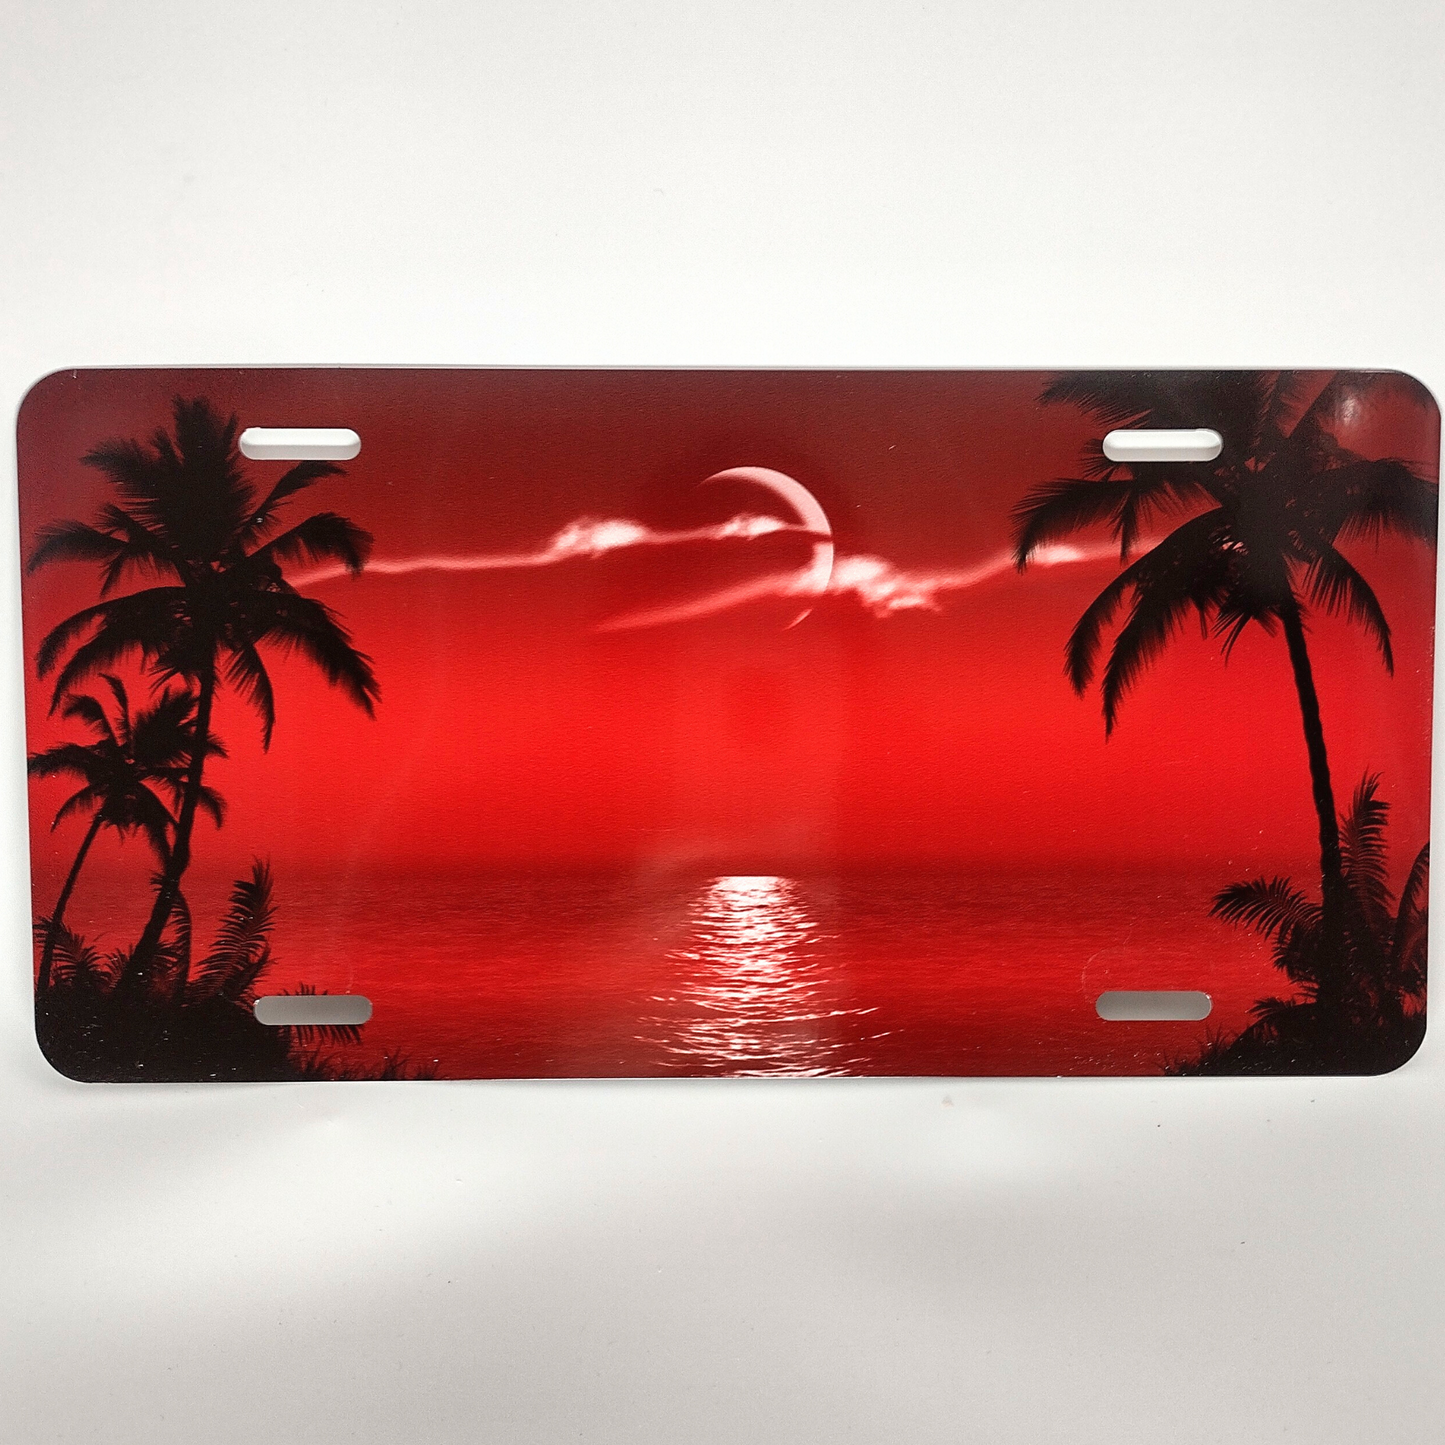 Palm Tree Scenic Personalized Custom License Vanity Plate Free Engraved Auto Car Tag Vehicle License Plate Beautifully Designed